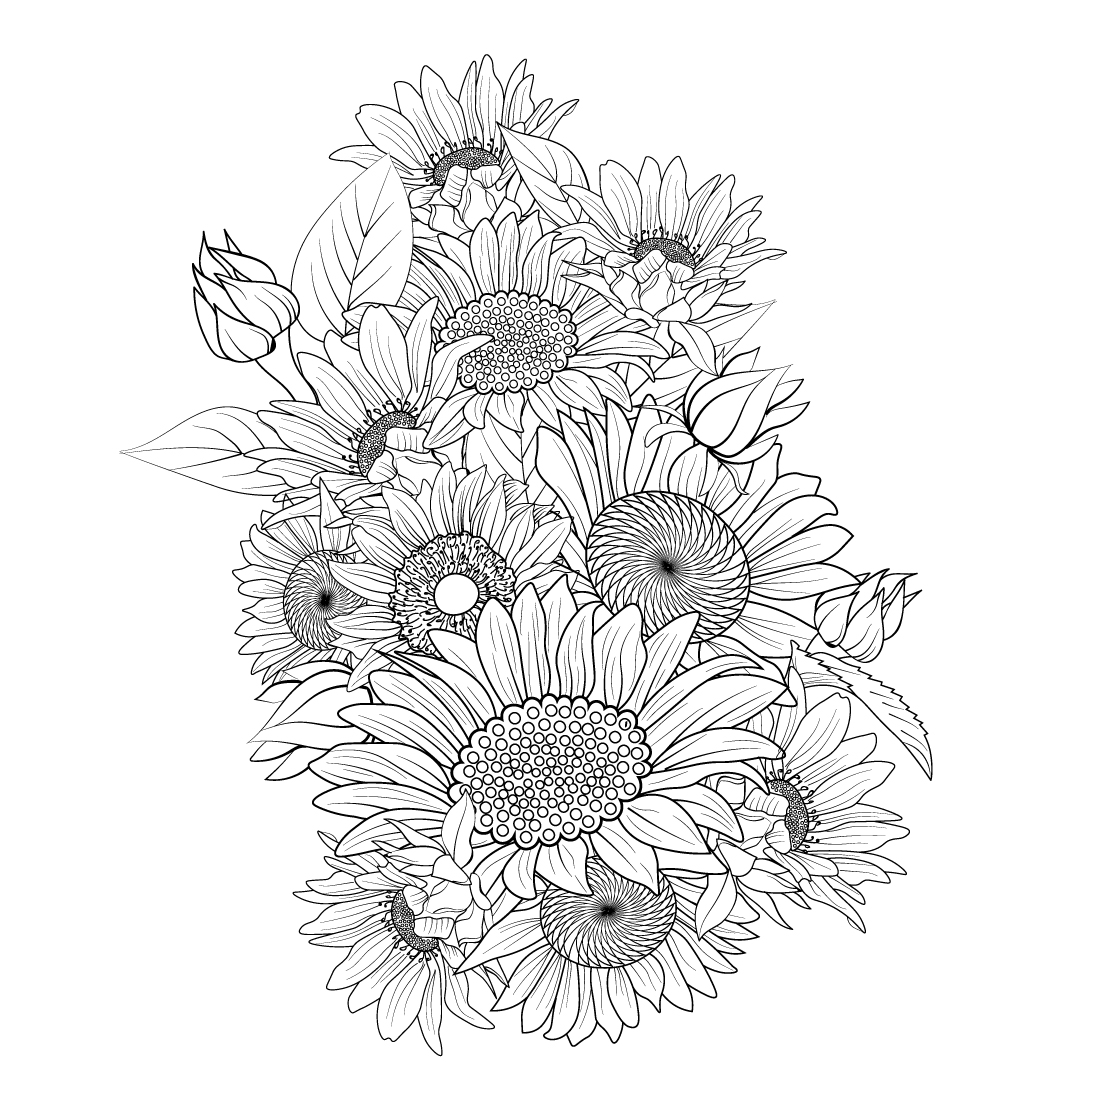 small sunflower drawing tattoo, sunflower tattoo black and white, black and white vintage sunflower tattoo, realistic black and grey sunflower tattoo, outline sunflower tattoo drawing, line drawing outline sunflower, stencil sunflower tattoo outline cover image.